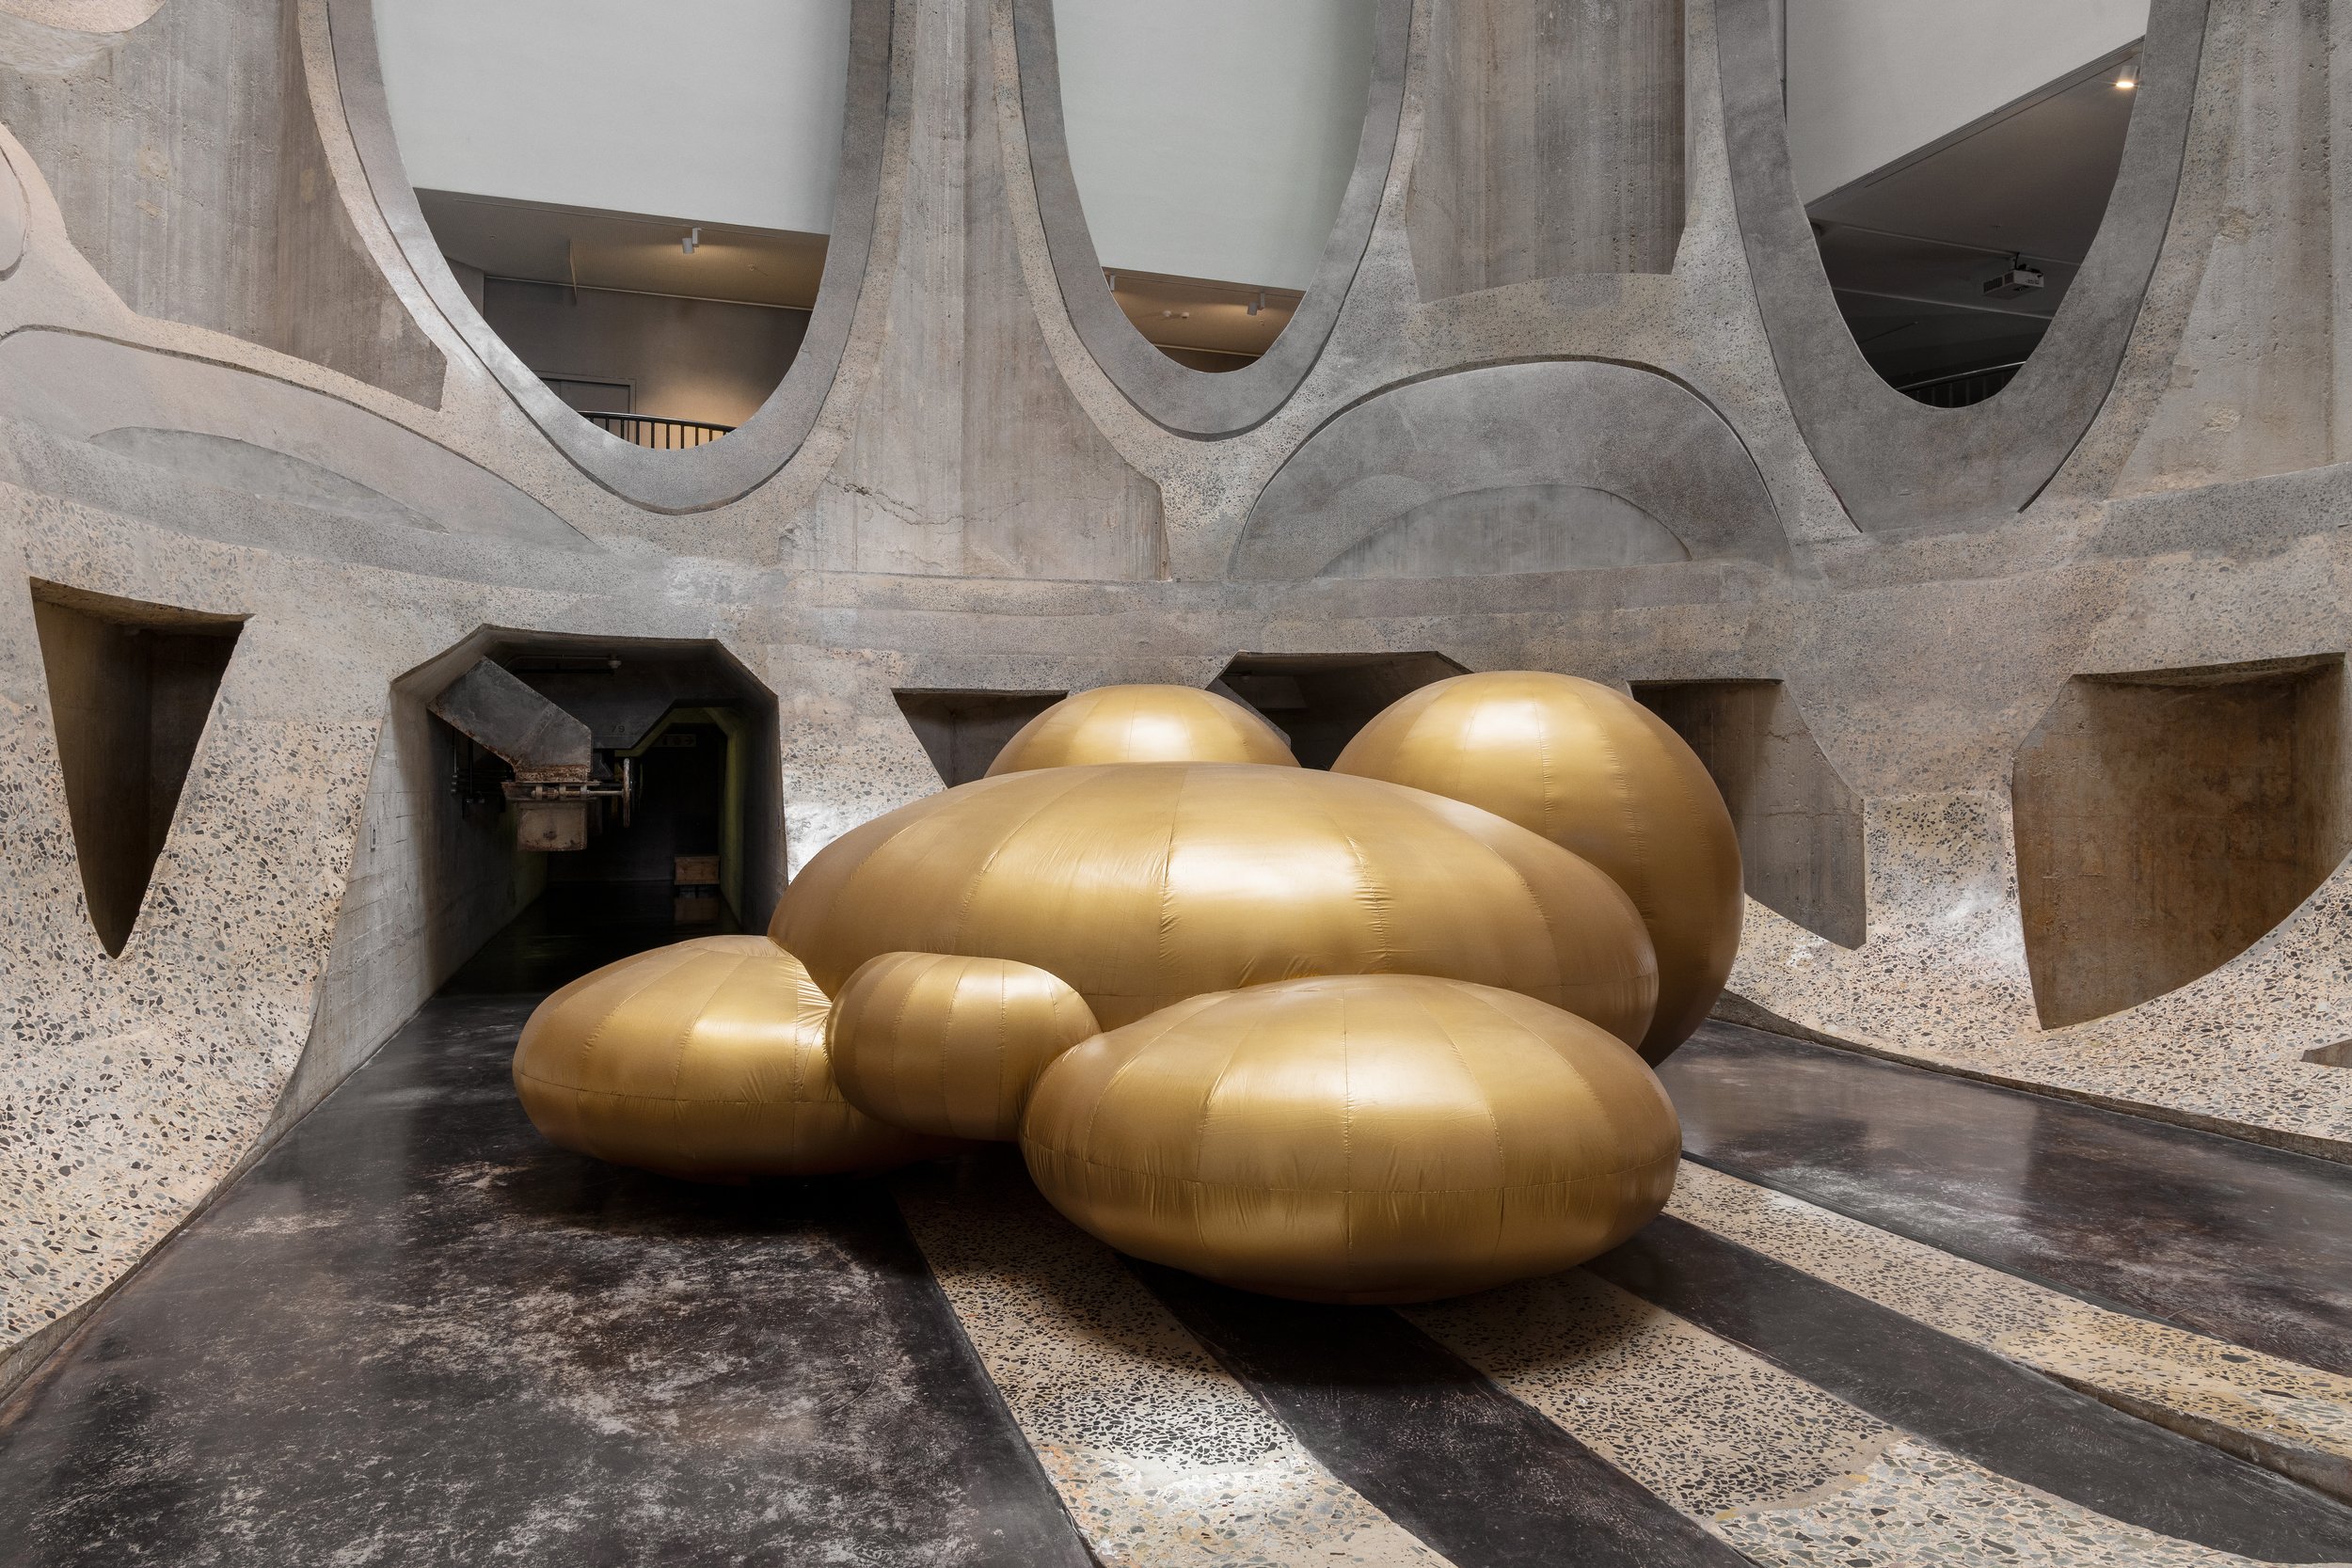  This image shows GoldenDean's Soft Vxnxs a large interactive inflatable sculpture. The sculpture is gold, and made of round shapes that altogether resemble a human figure. It is situated in a large concrete space. 